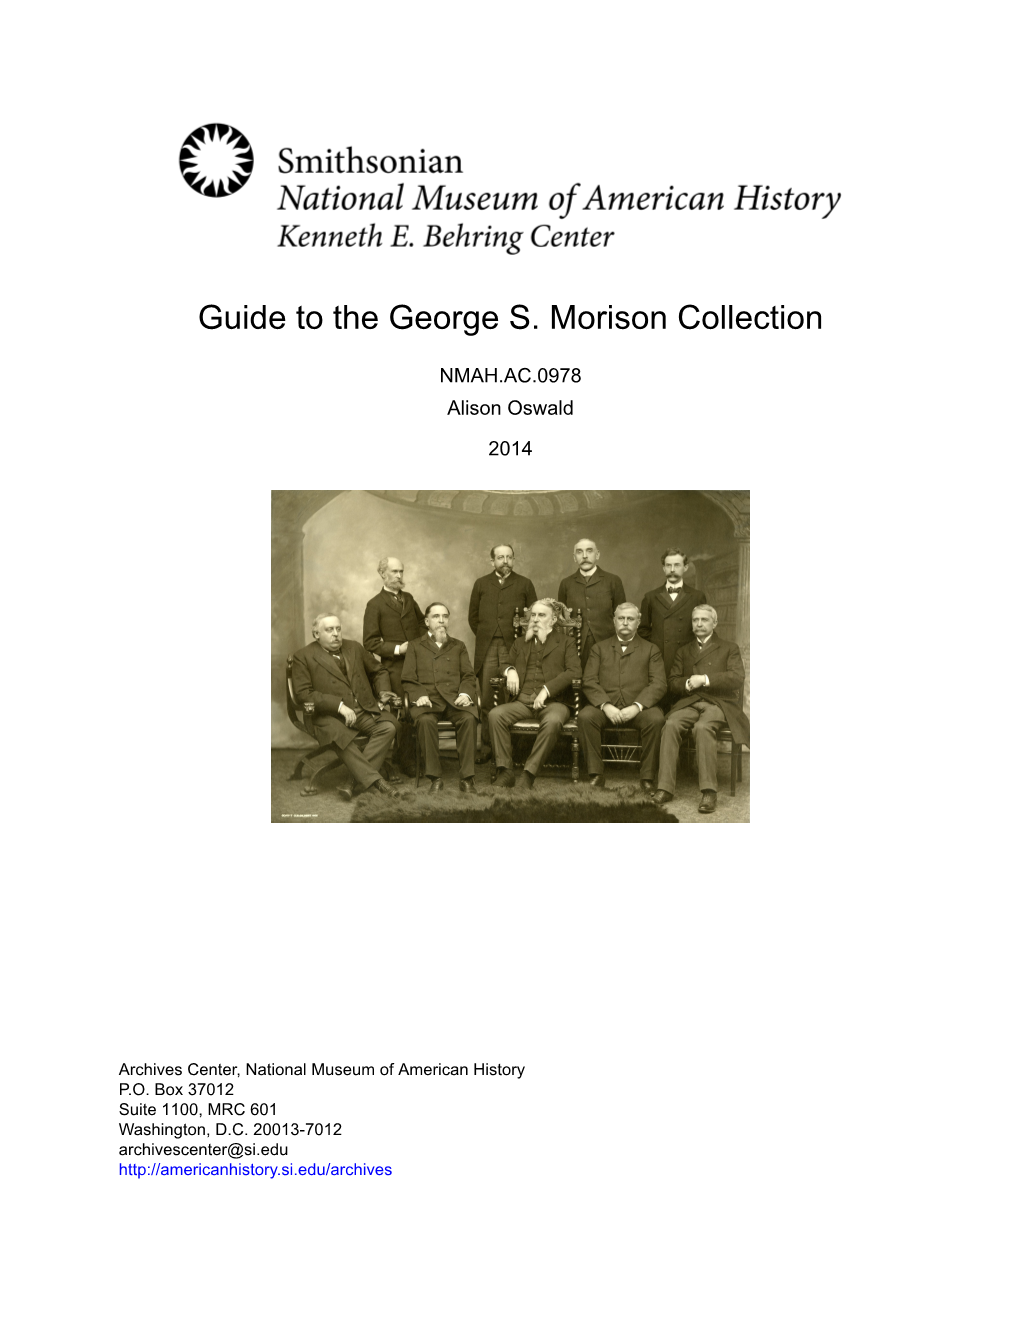 Guide to the George S. Morison Collection